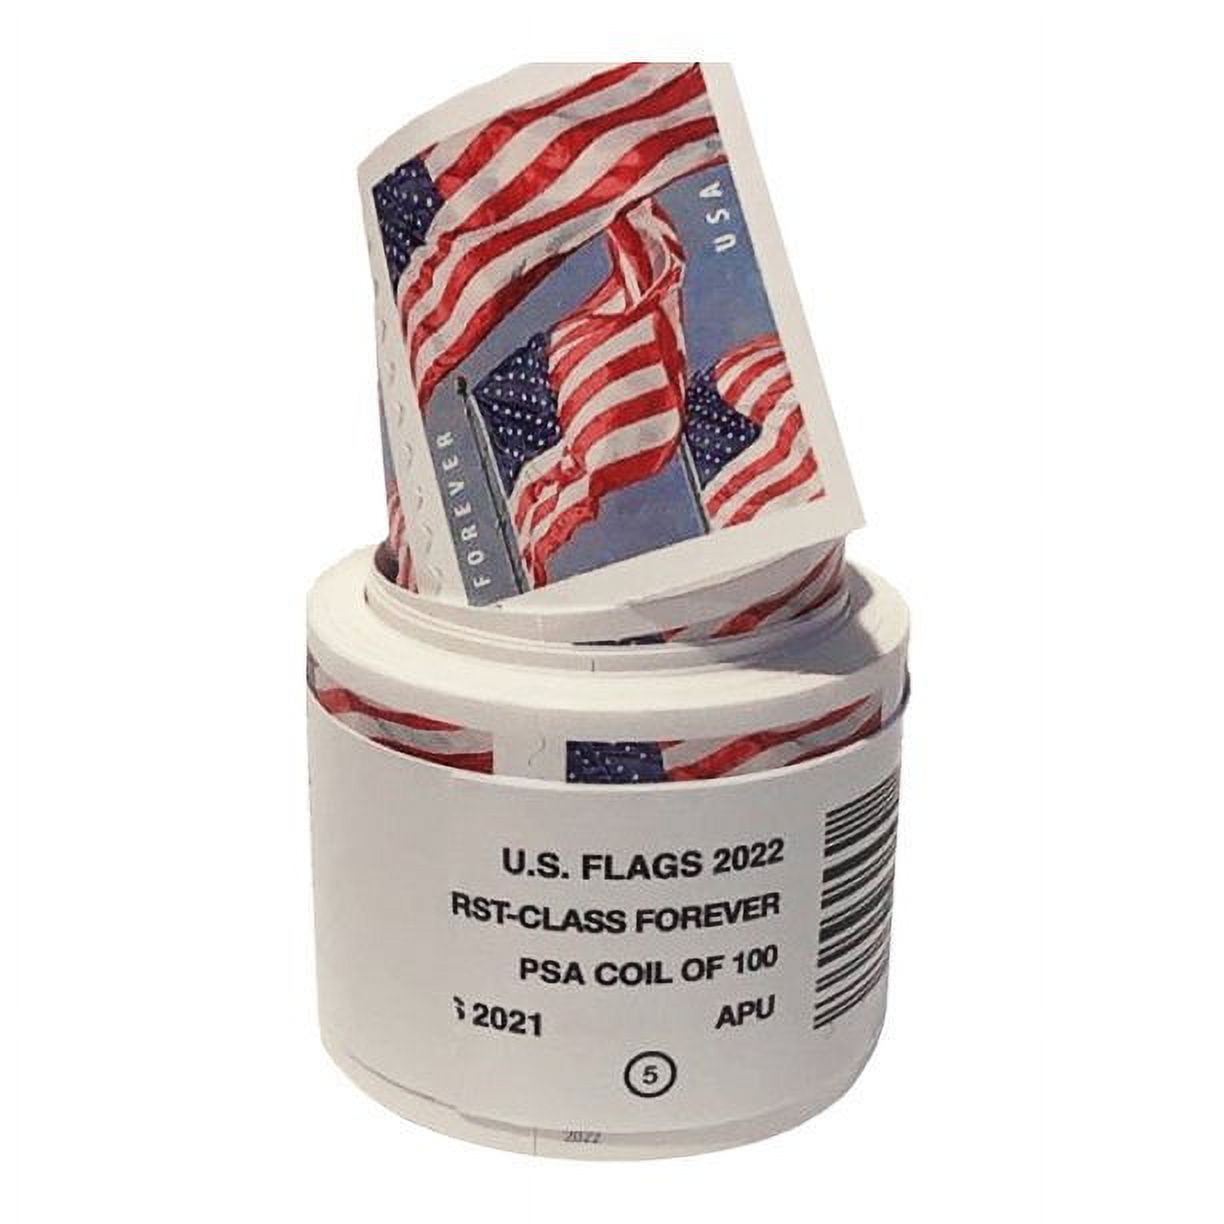 U.S. Flag 1 Roll of 100 USPS Forever First Class Postage Stamps Billowing  Stars & Stripes Celebrating Patriotism